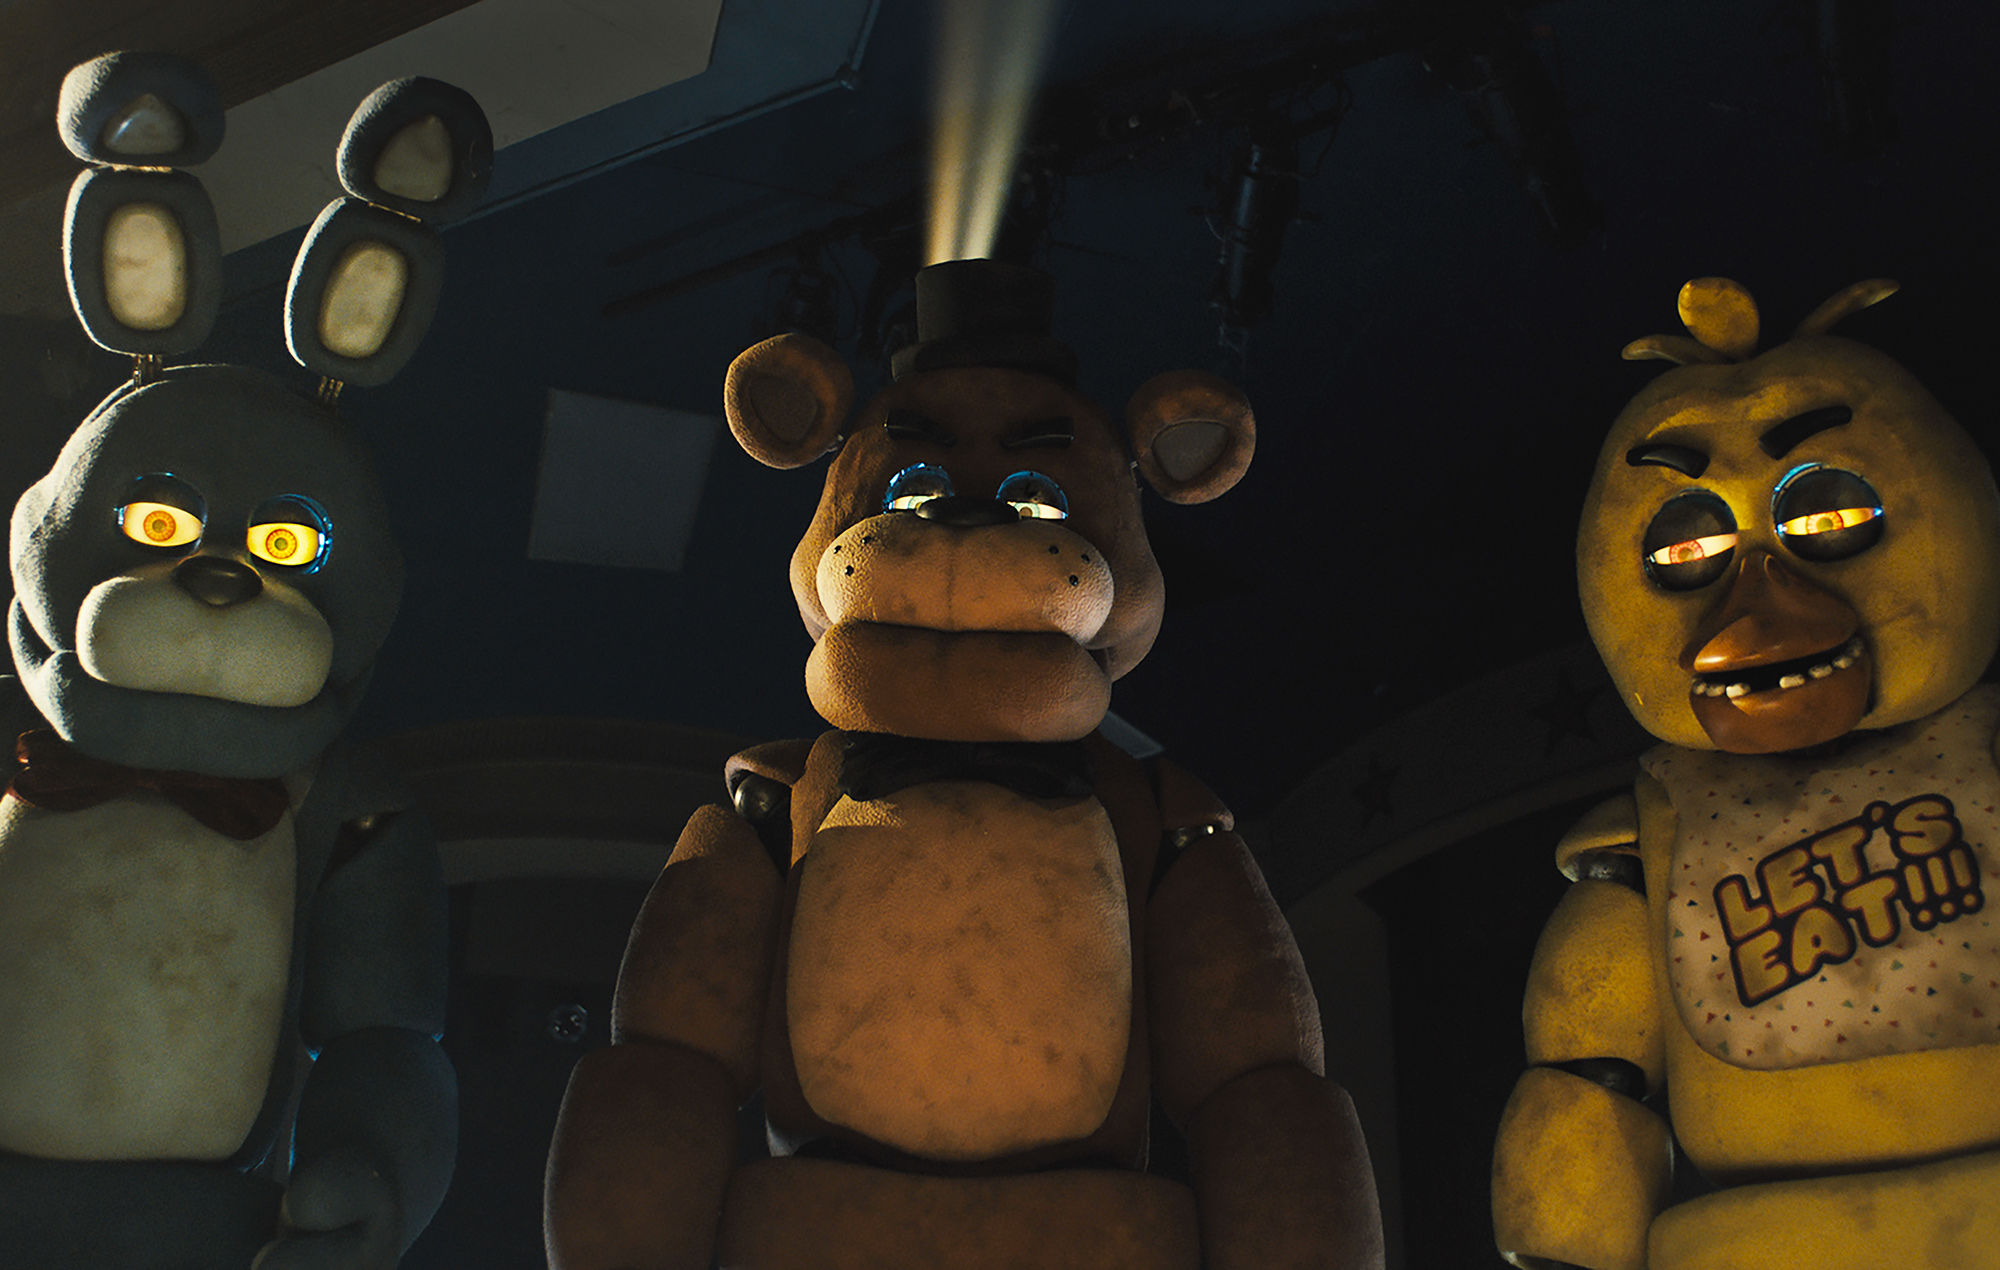 When is ‘Five Nights At Freddy’s 2’ coming out?